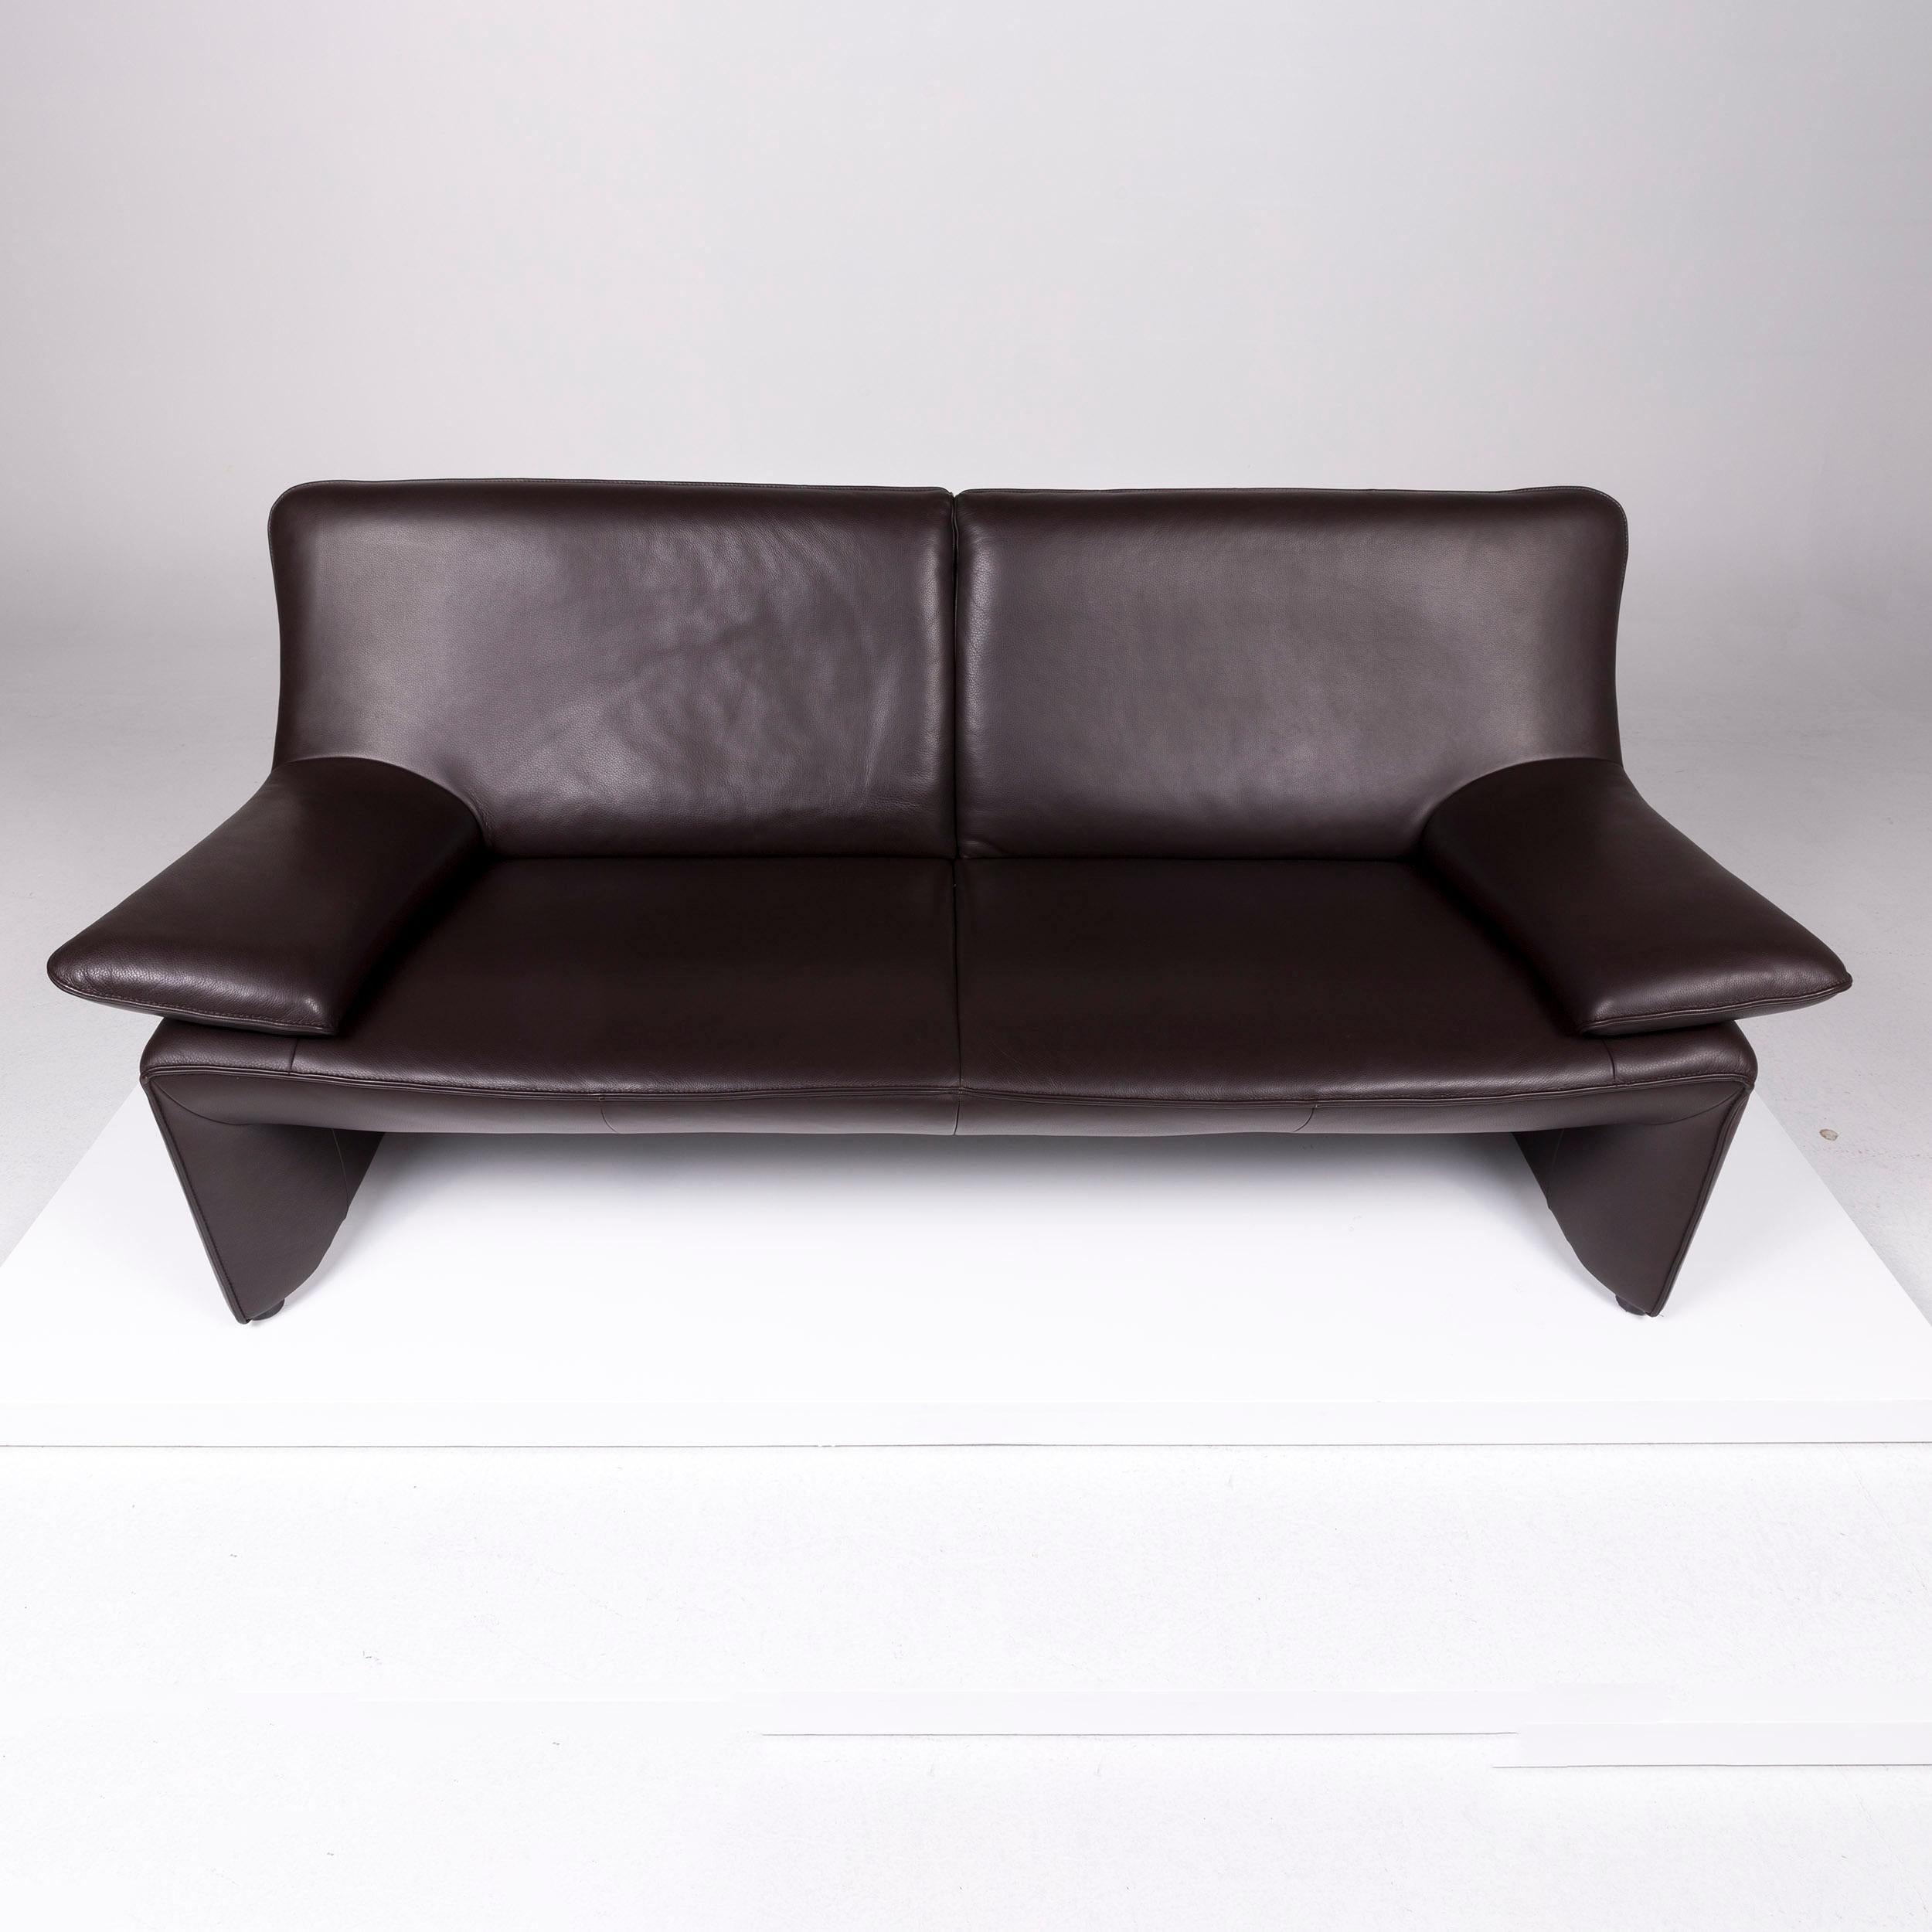 We bring to you a Laauser flair leather sofa brown dark brown three-seat couch.
 
 Product measurements in centimeters:
 
Depth 90
Width 198
Height 85
Seat-height 42
Rest-height 56
Seat-depth 54
Seat-width 135
Back-height 50.
  